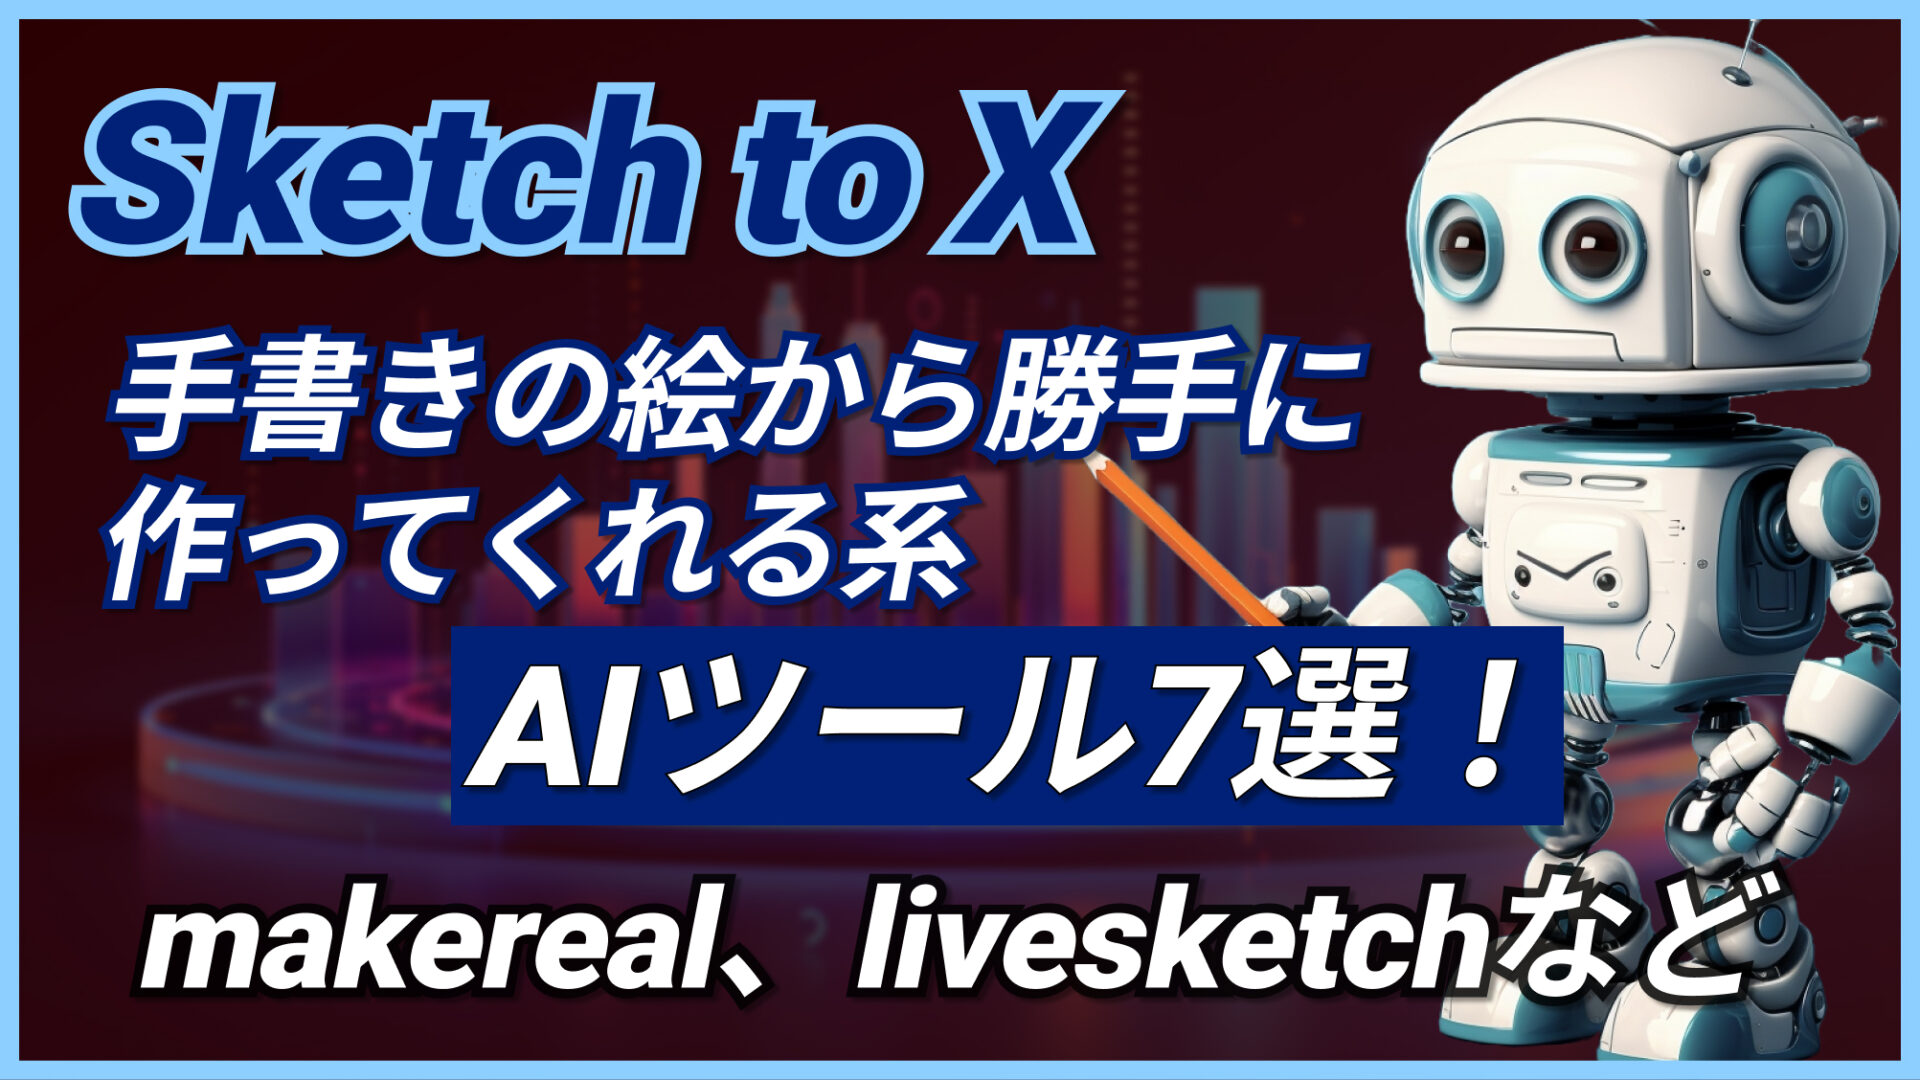 Sketch-to-X AIツール makereal livesketch